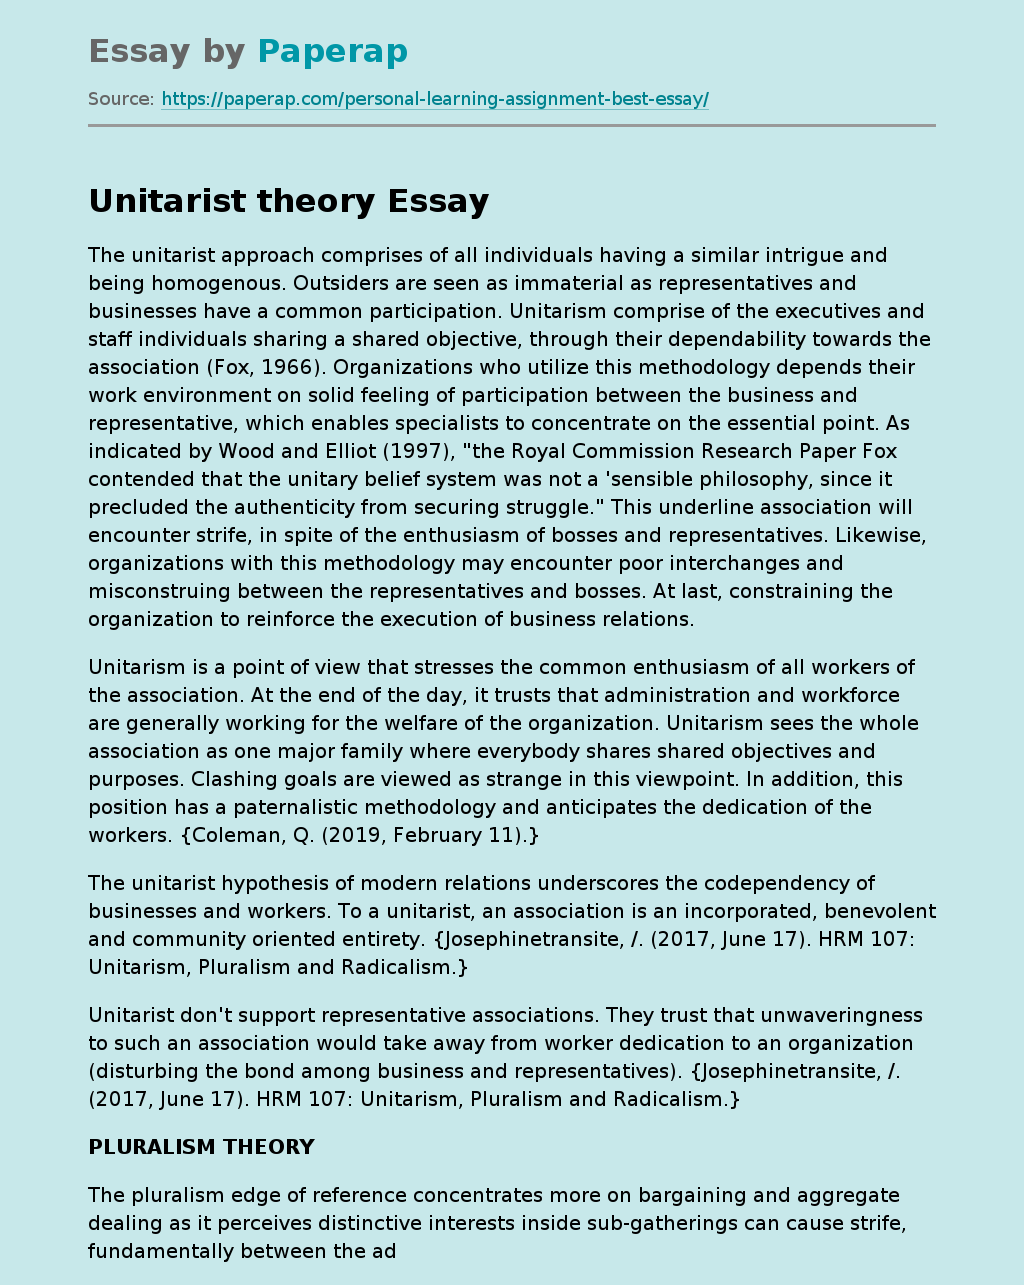 Difference Between Unitarism and Pluralism